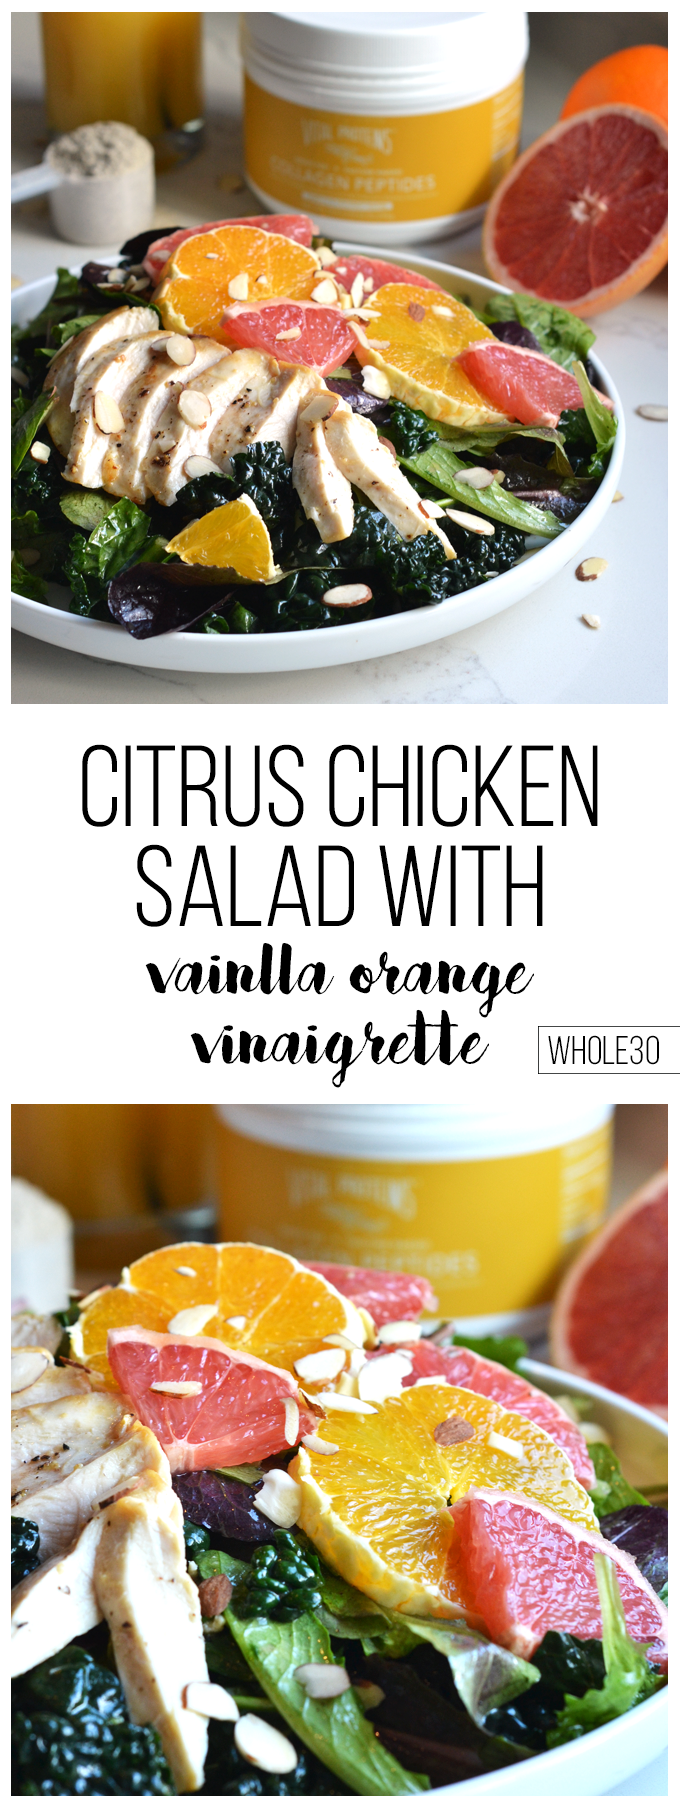 This Citrus Chicken Salad with Vanilla Orange Vinaigrette is a perfect mix of sweet and savory for your Whole30 meal. Using Vital Proteins Collagen to add Protein and flavor!